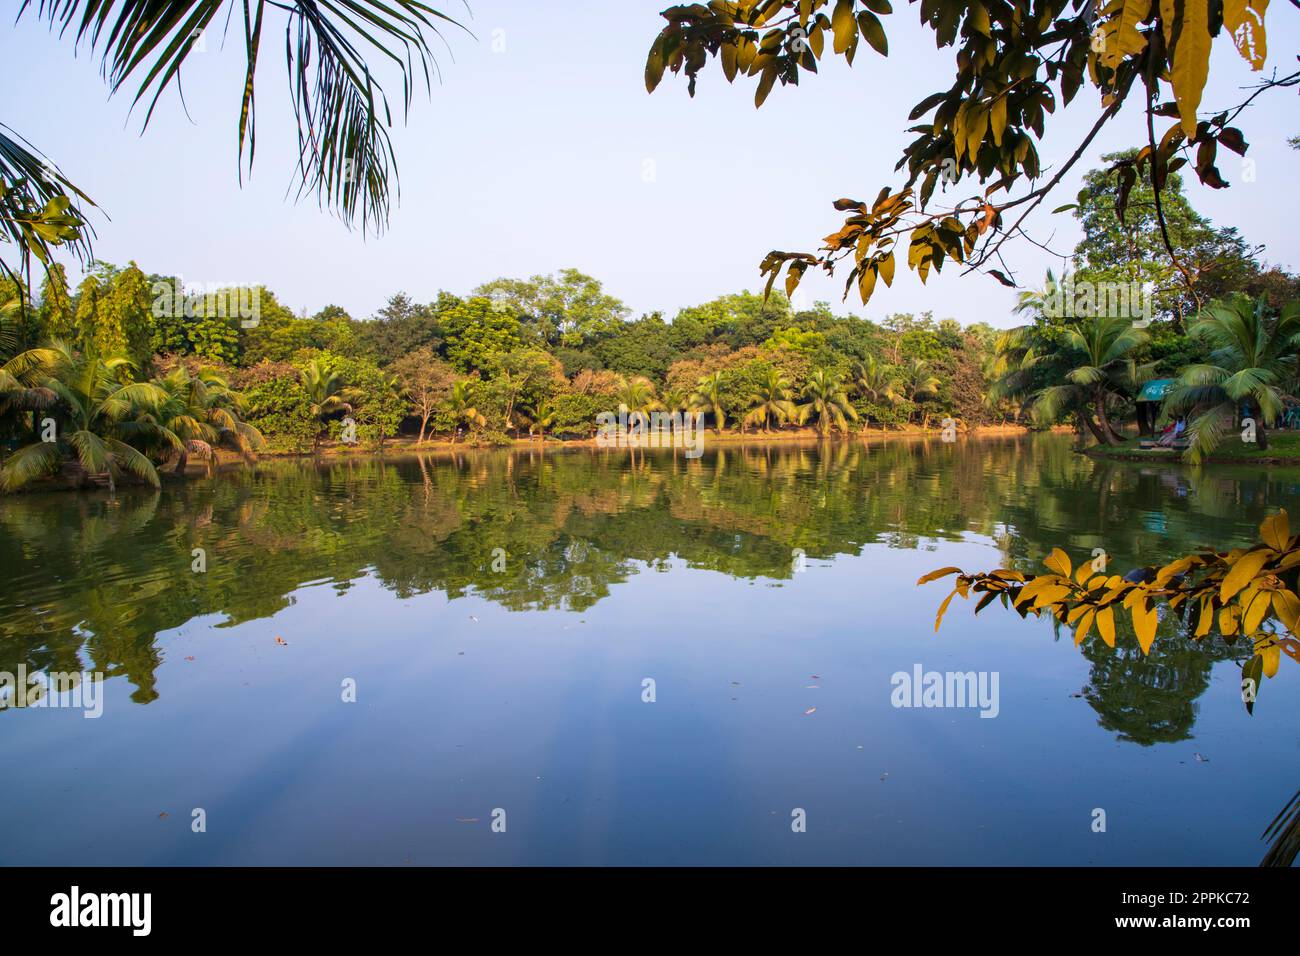 Natural landscape view Reflection of trees in the lake water against blue sky Stock Photo